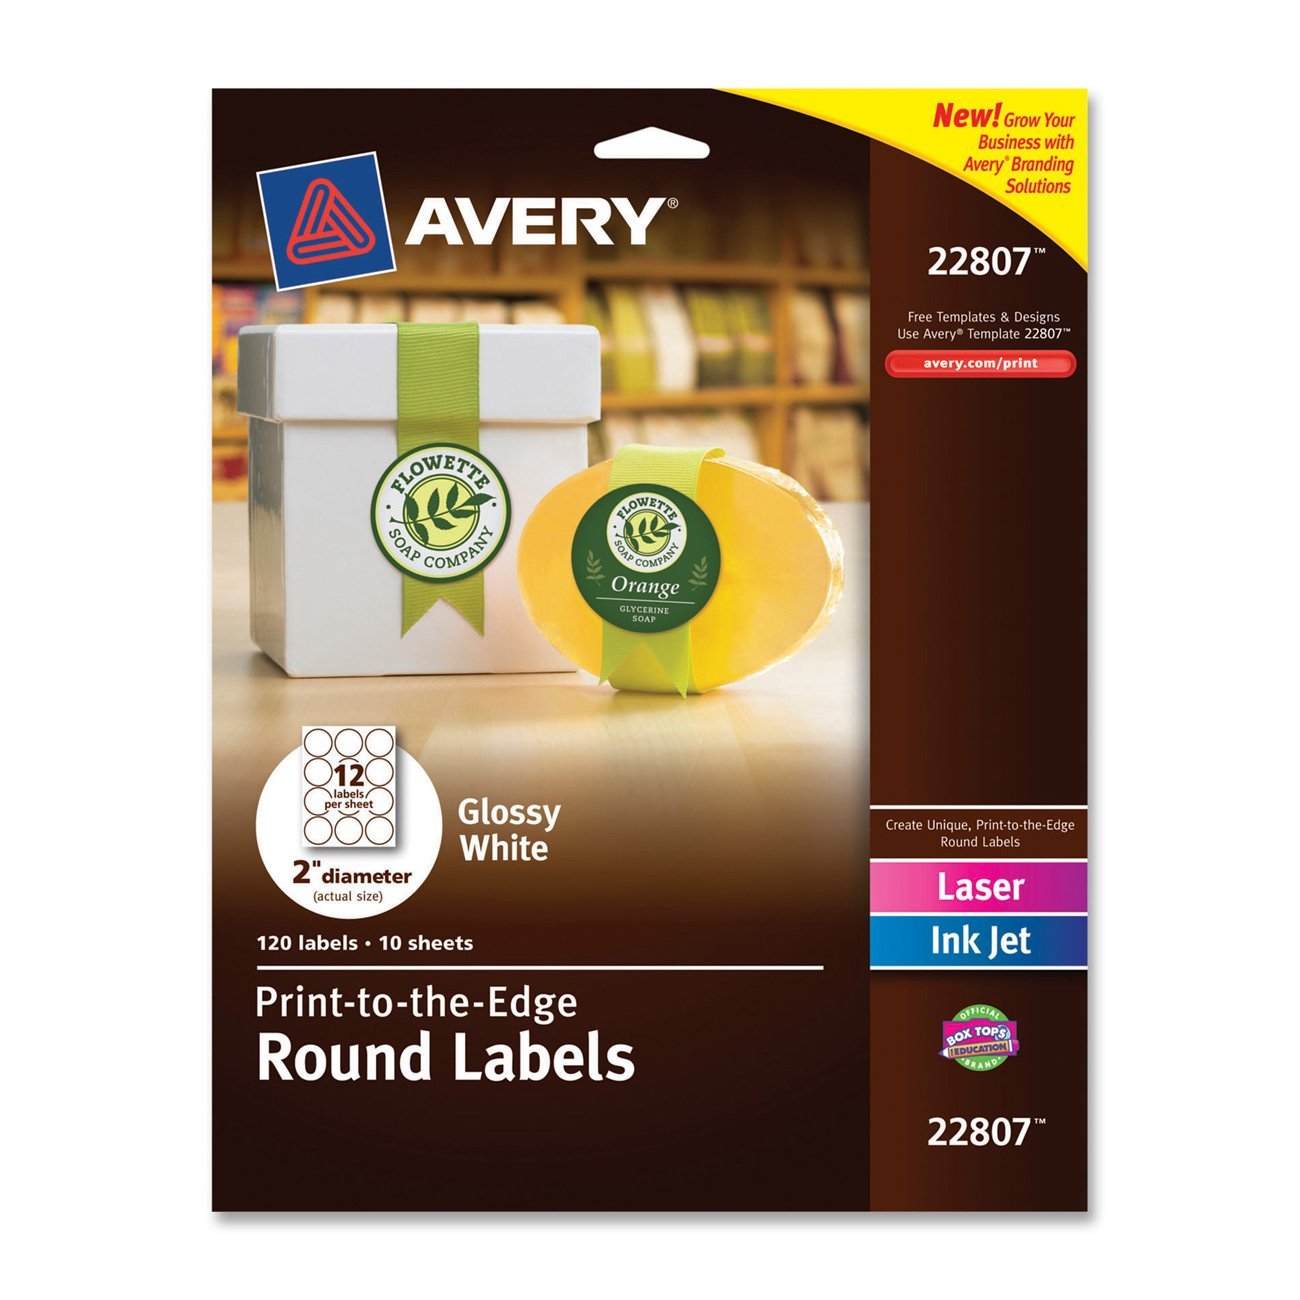 Avery round labels